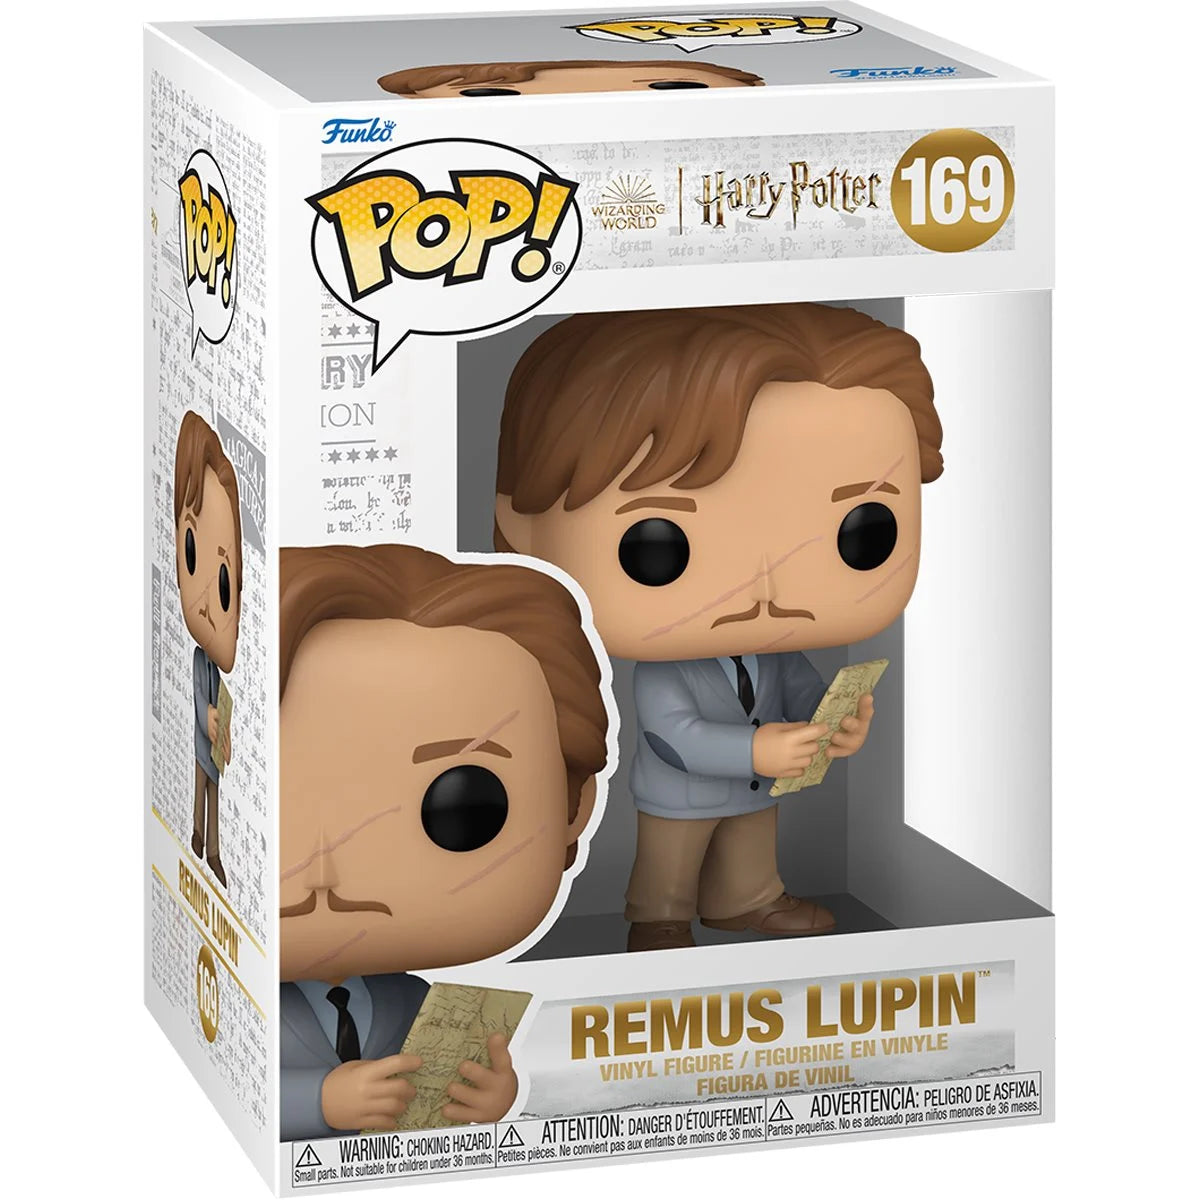 Harry Potter Remus Lupin pop